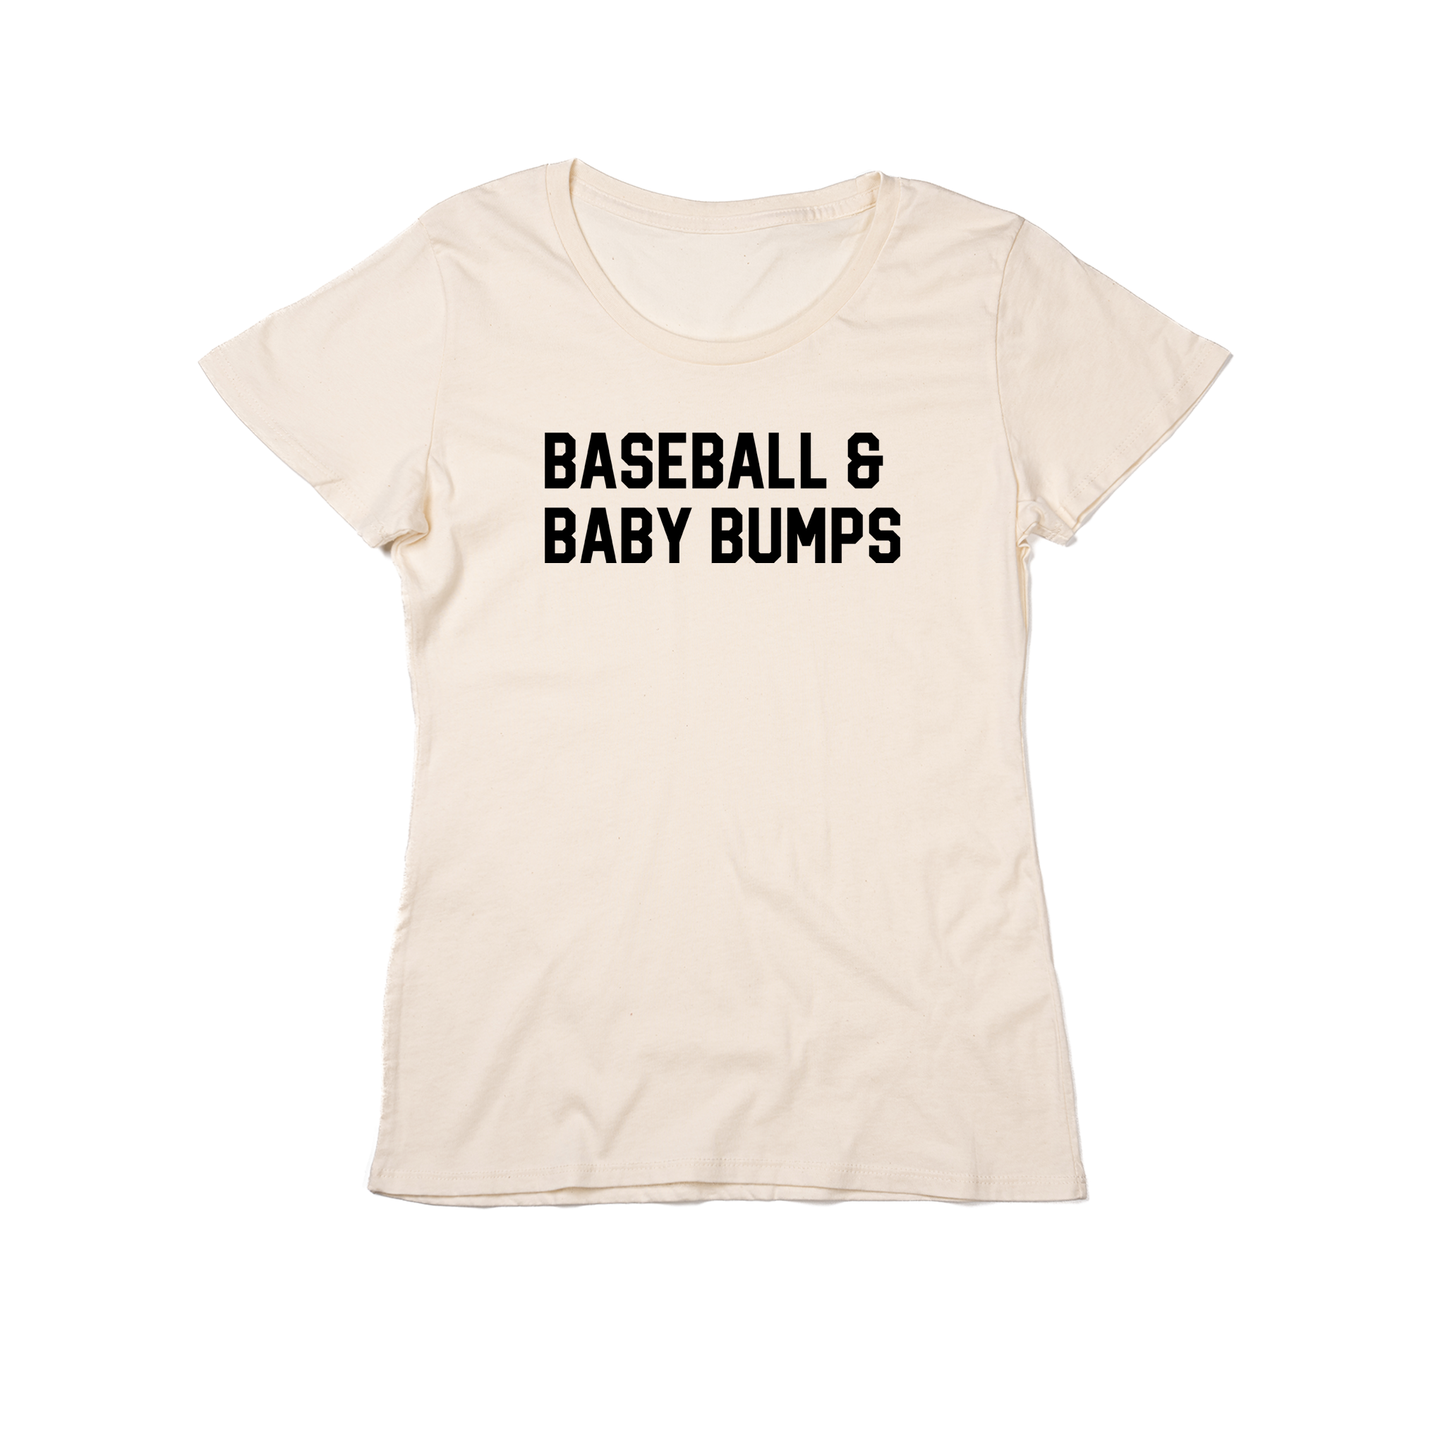 Baseball & Baby Bumps (Black) - Women's Fitted Tee (Natural)